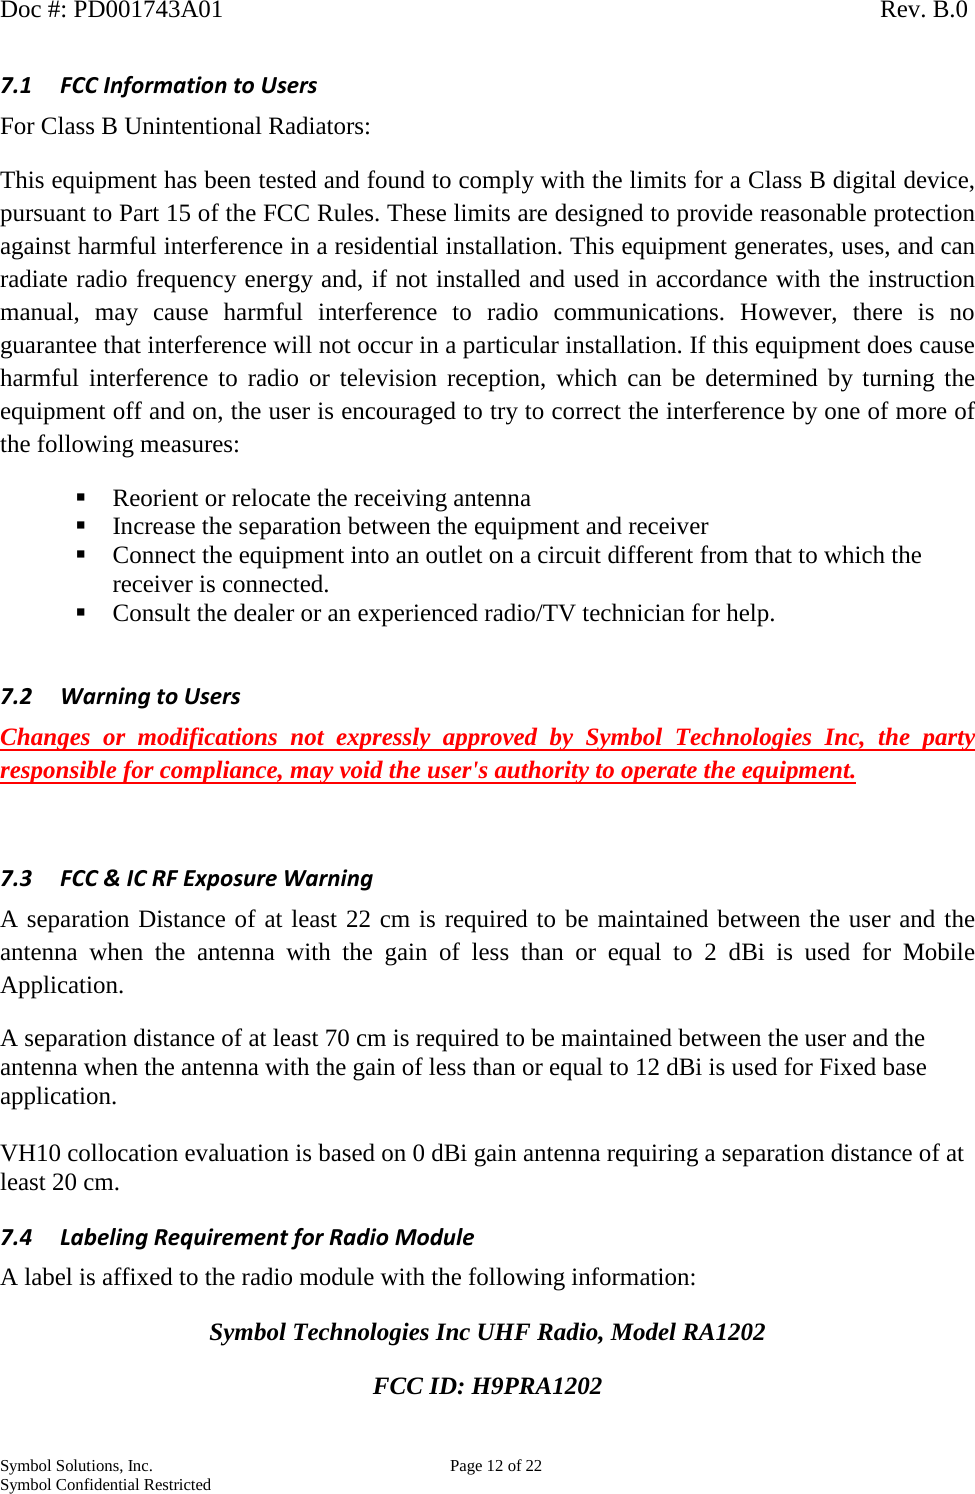 Doc #: PD001743A01                                                                                                         Rev. B.0 Symbol Solutions, Inc.    Page 12 of 22 Symbol Confidential Restricted   7.1 FCC Information to Users For Class B Unintentional Radiators: This equipment has been tested and found to comply with the limits for a Class B digital device, pursuant to Part 15 of the FCC Rules. These limits are designed to provide reasonable protection against harmful interference in a residential installation. This equipment generates, uses, and can radiate radio frequency energy and, if not installed and used in accordance with the instruction manual, may cause harmful interference to radio communications. However, there is no guarantee that interference will not occur in a particular installation. If this equipment does cause harmful interference to radio or television reception, which can be determined by turning the equipment off and on, the user is encouraged to try to correct the interference by one of more of the following measures:  Reorient or relocate the receiving antenna  Increase the separation between the equipment and receiver  Connect the equipment into an outlet on a circuit different from that to which the receiver is connected.  Consult the dealer or an experienced radio/TV technician for help.  7.2 Warning to Users Changes or modifications not expressly approved by Symbol Technologies Inc, the party responsible for compliance, may void the user&apos;s authority to operate the equipment.  7.3 FCC &amp; IC RF Exposure Warning A separation Distance of at least 22 cm is required to be maintained between the user and the antenna when the antenna with the gain of less than or equal to 2  dBi is used for Mobile Application. A separation distance of at least 70 cm is required to be maintained between the user and the antenna when the antenna with the gain of less than or equal to 12 dBi is used for Fixed base application.  VH10 collocation evaluation is based on 0 dBi gain antenna requiring a separation distance of at least 20 cm.  7.4 Labeling Requirement for Radio Module  A label is affixed to the radio module with the following information: Symbol Technologies Inc UHF Radio, Model RA1202 FCC ID: H9PRA1202 